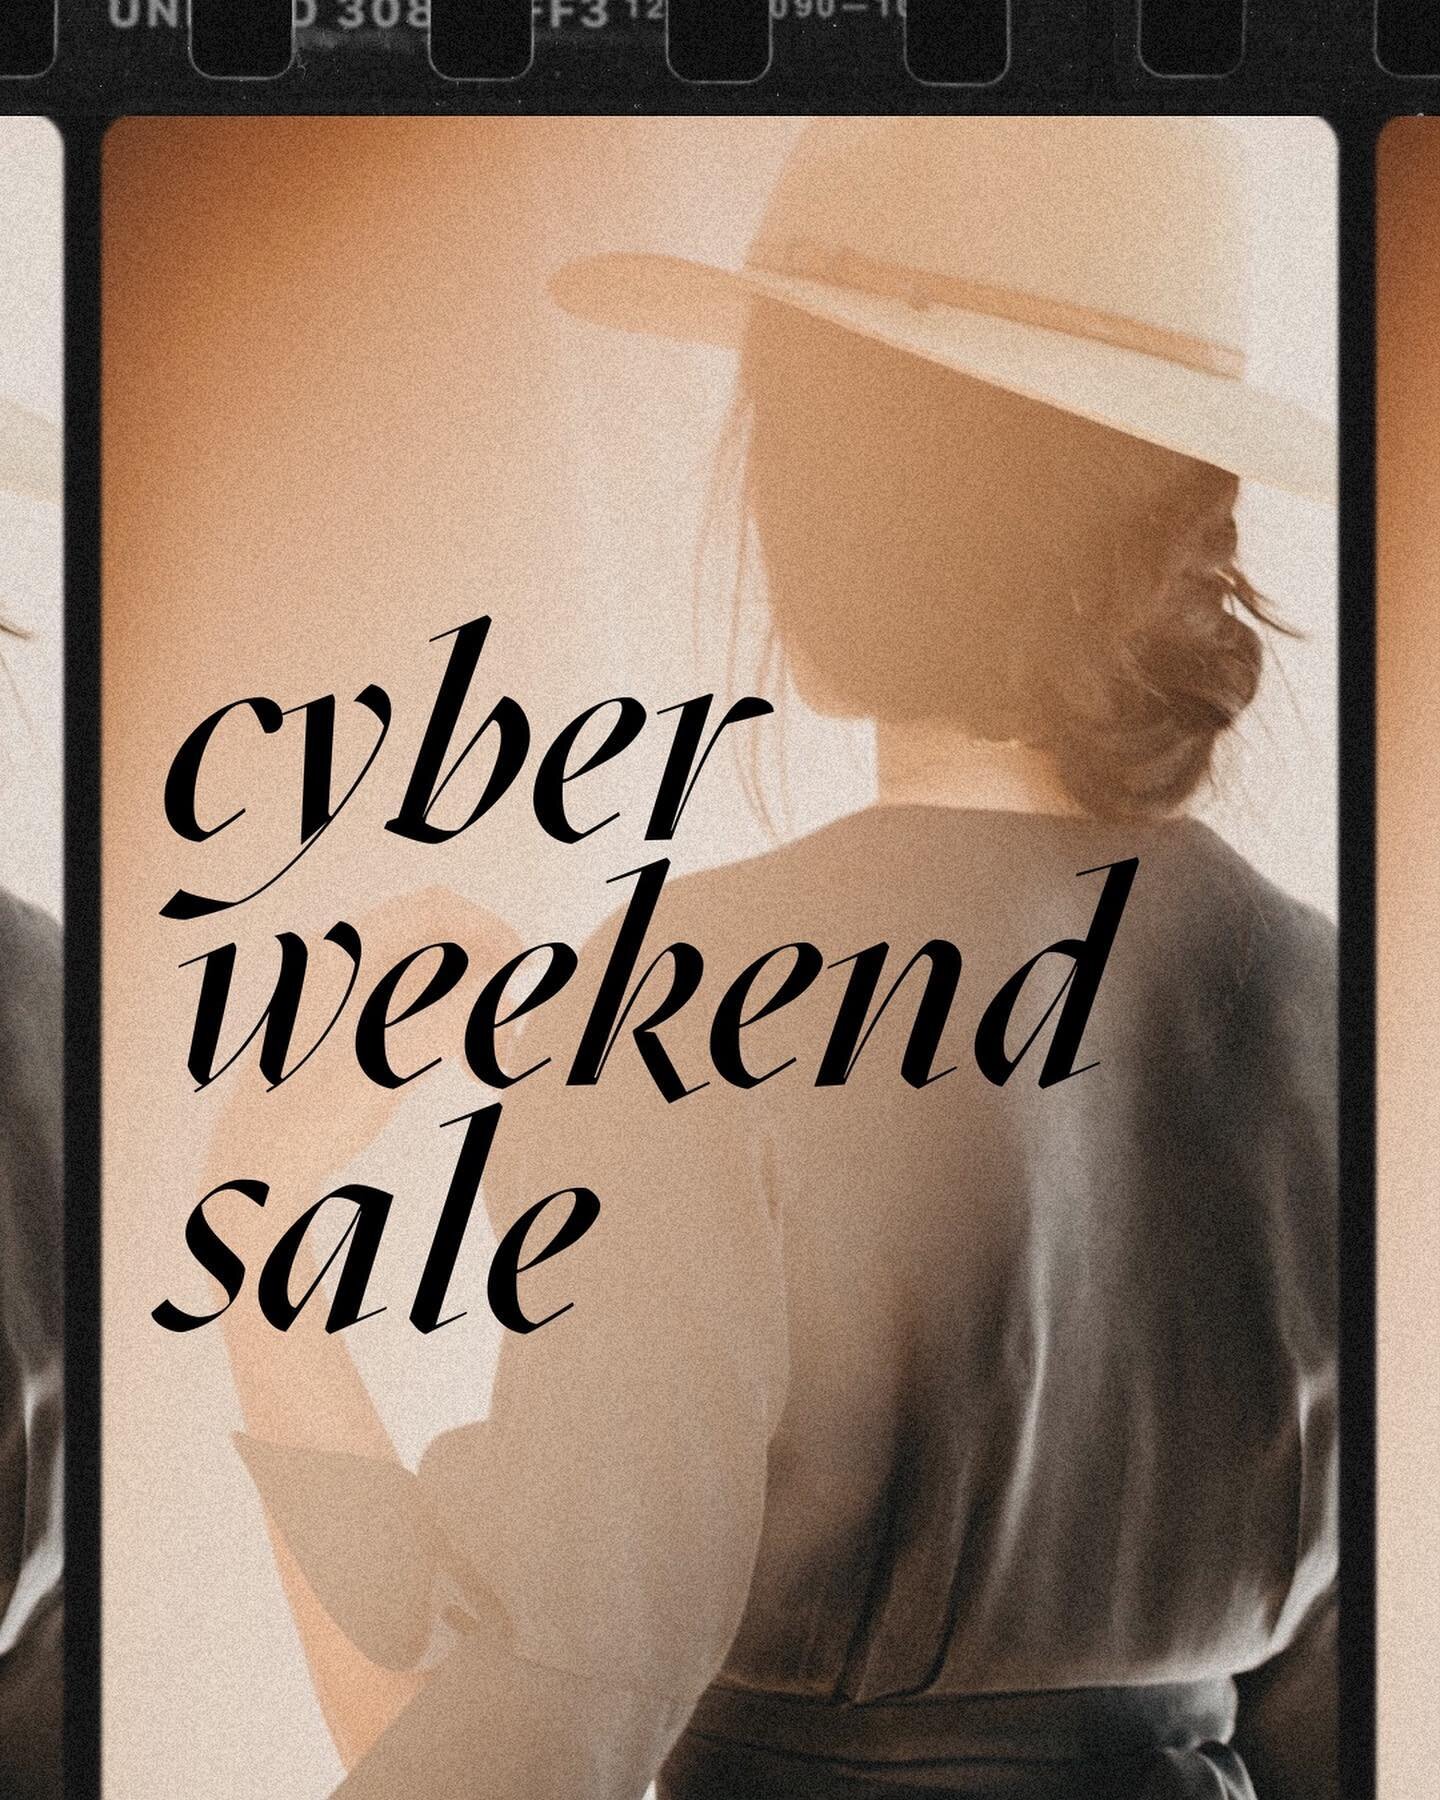 A few quick social story designs for a client&rsquo;s cyber weekend promos, brand @ofmythandmuse .